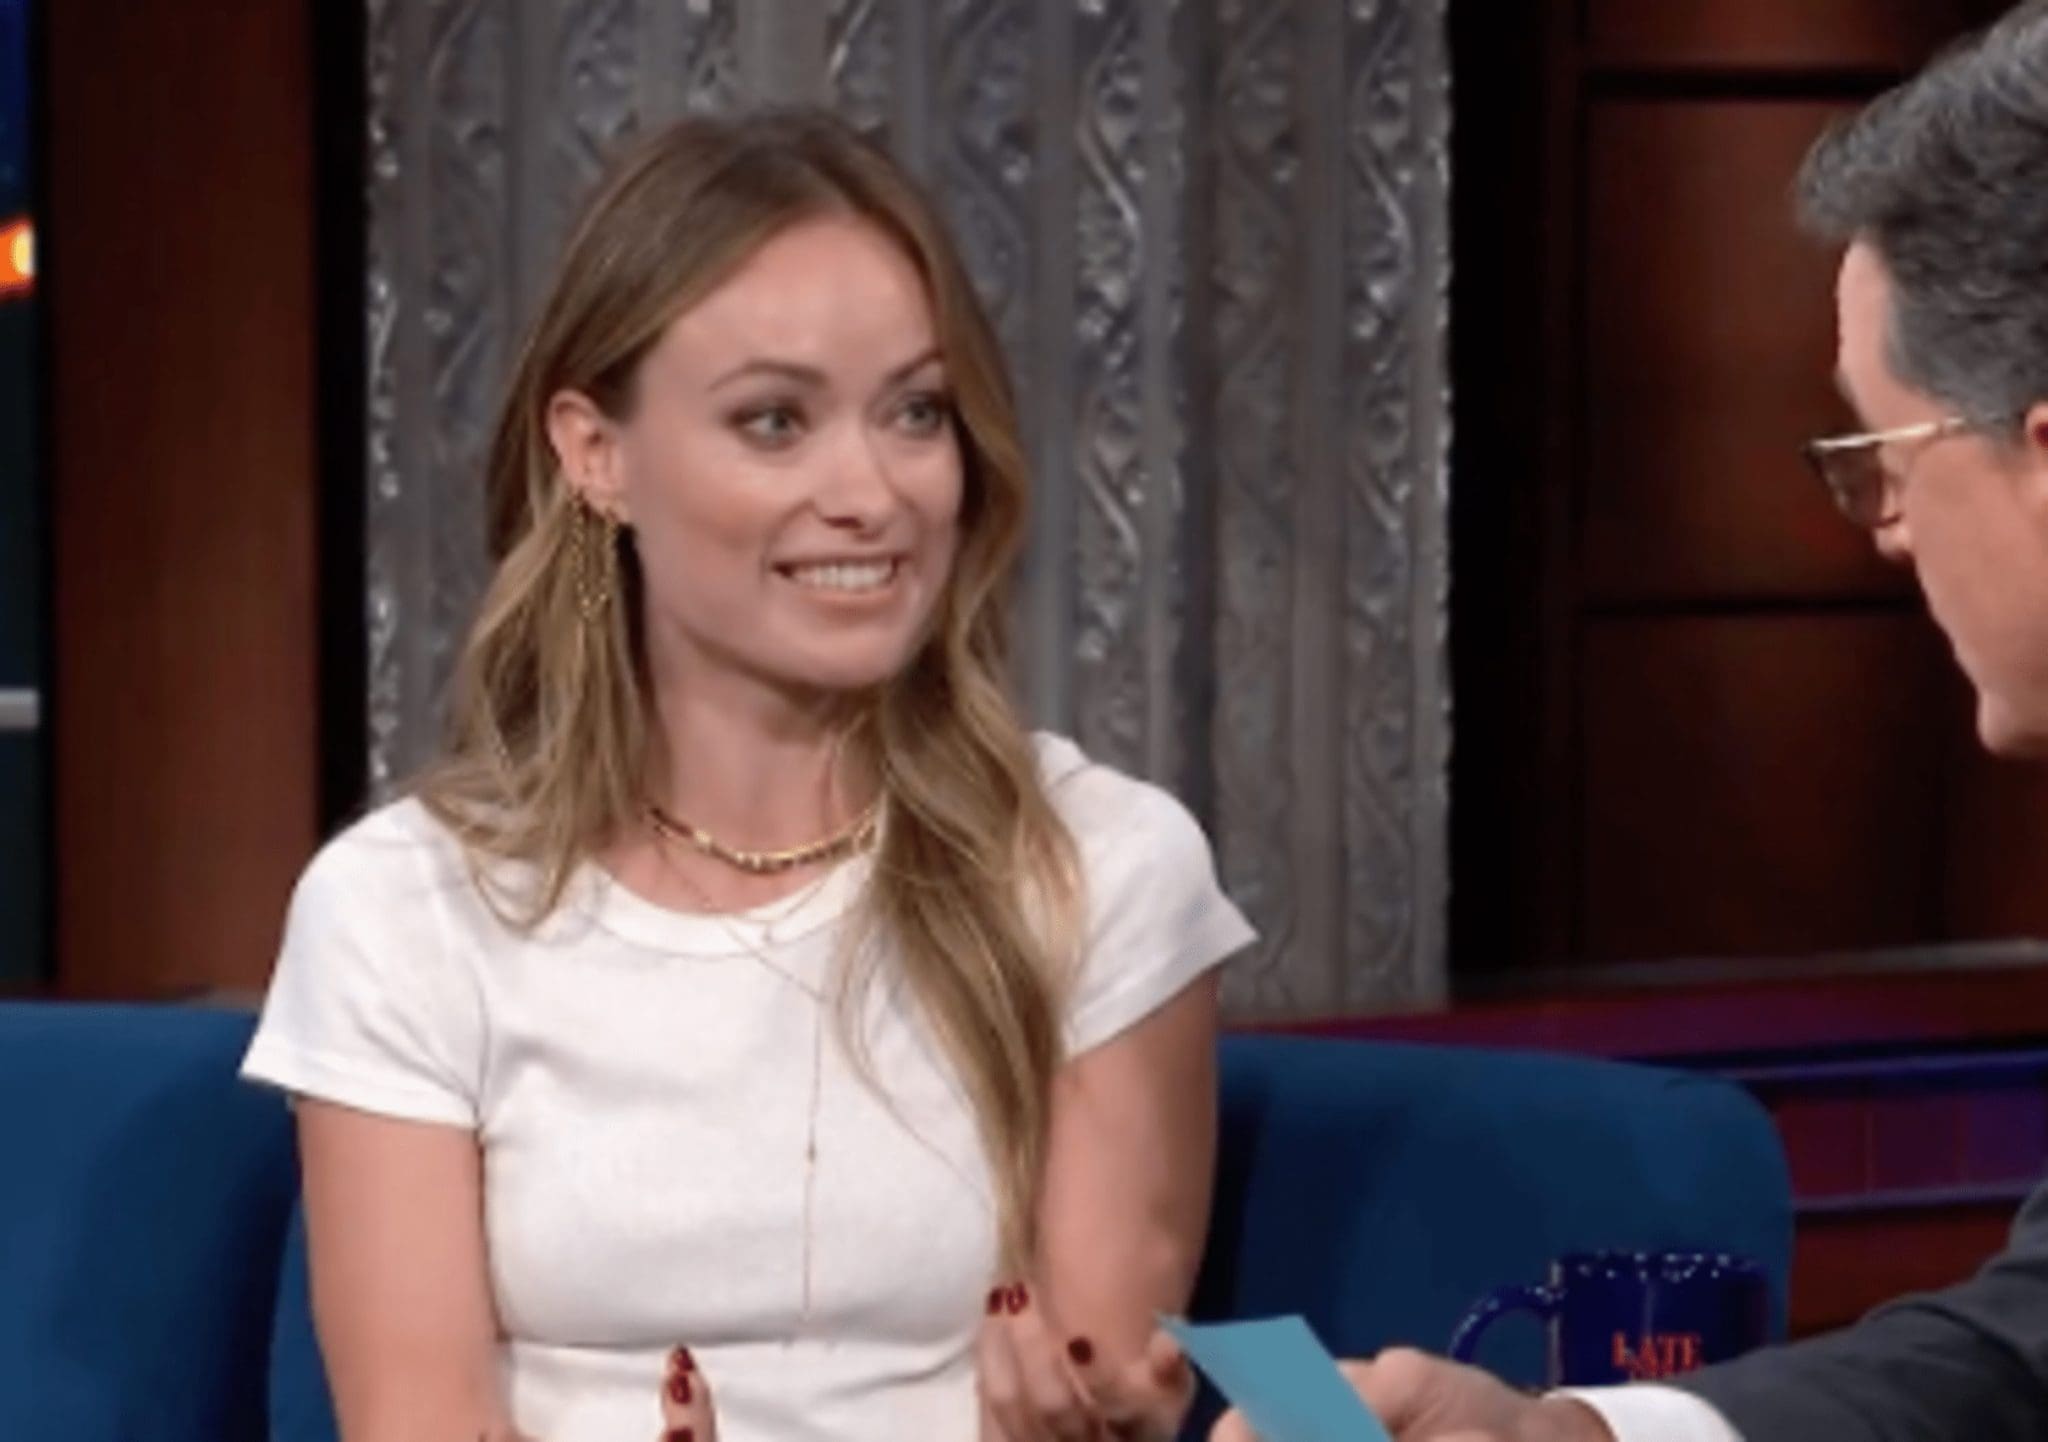 There Were Accusations That Harry Styles Spit On Chris Pine, And Olivia Wilde Addressed Them